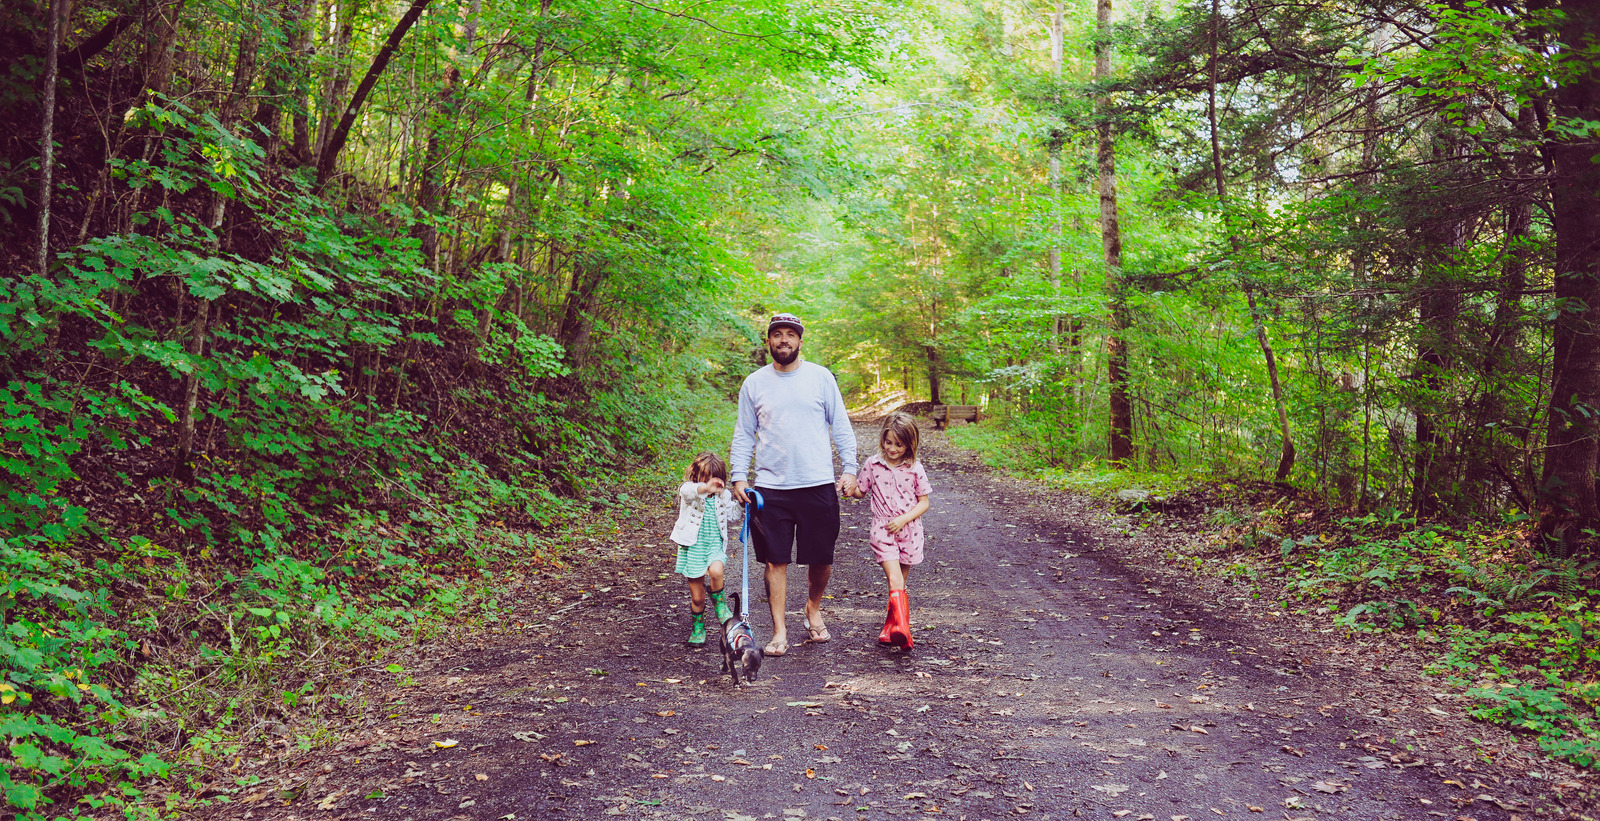 Man, father, with two young children, girls age 7 and 4 take a walk together with the family dog on a leash in a nature area, candid and happy